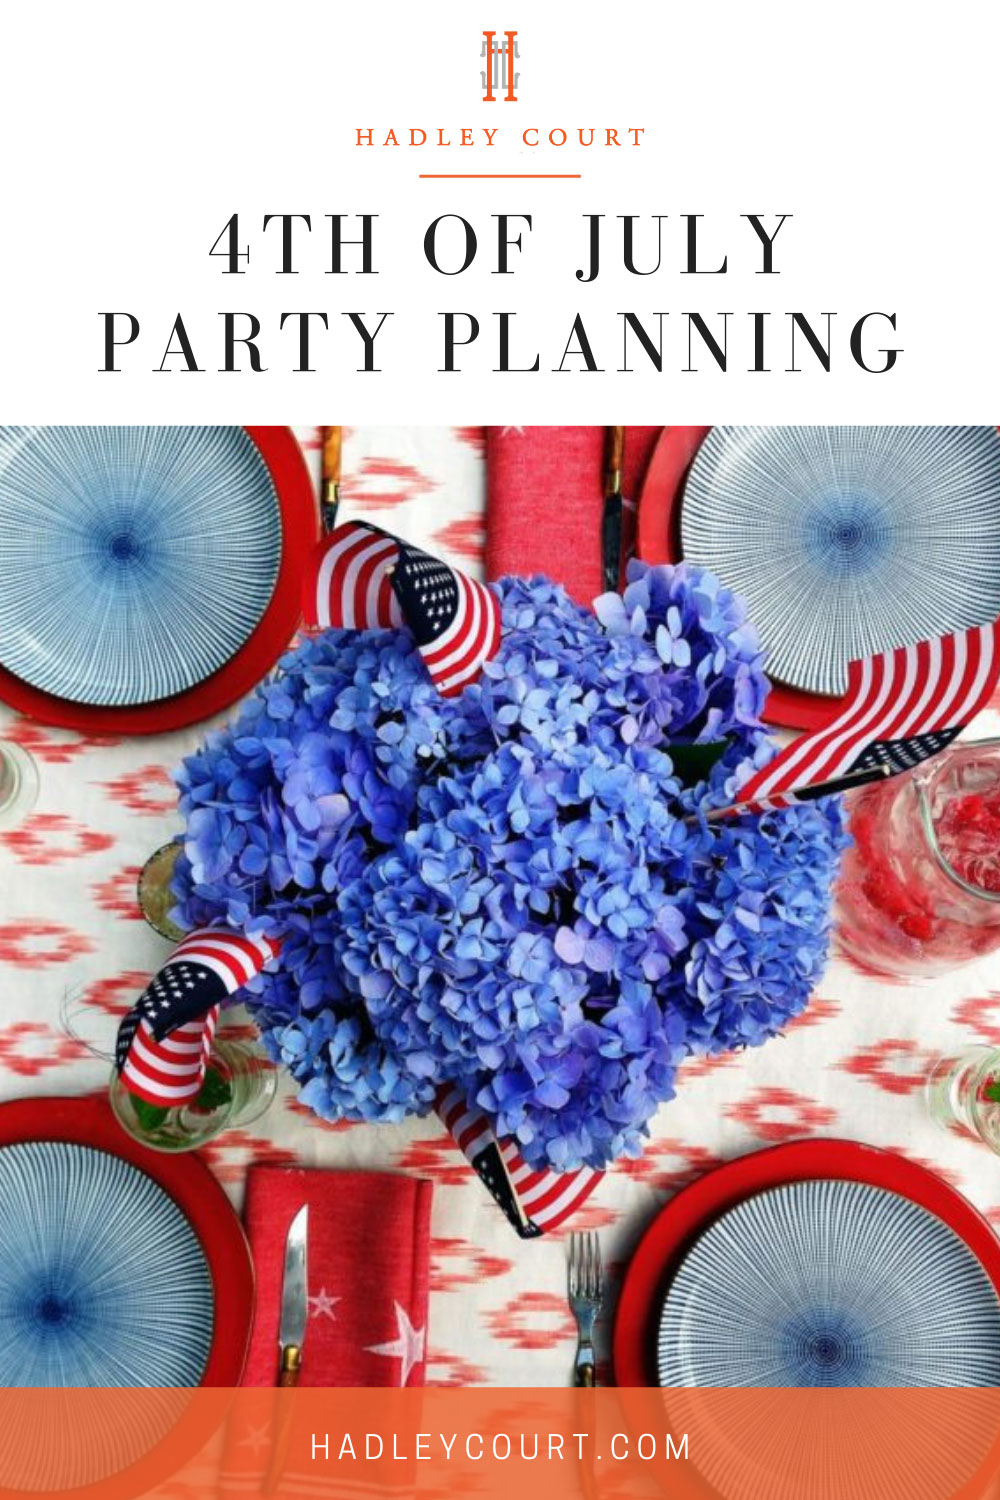 Pin image example for Hadley Court with text "4th of July party planning".